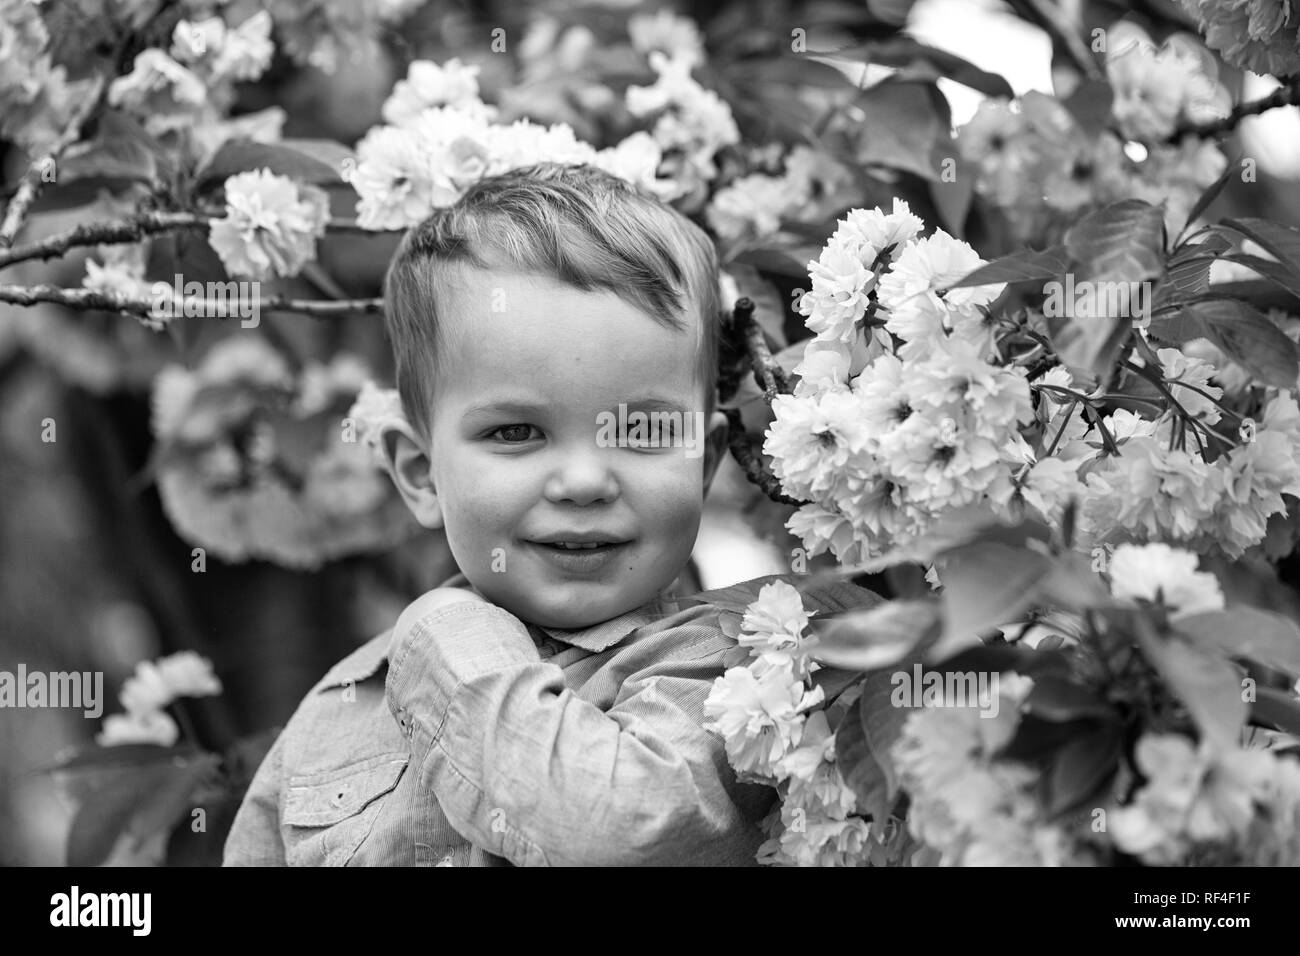 Cute baby boy among pink blossoming flowers Stock Photo